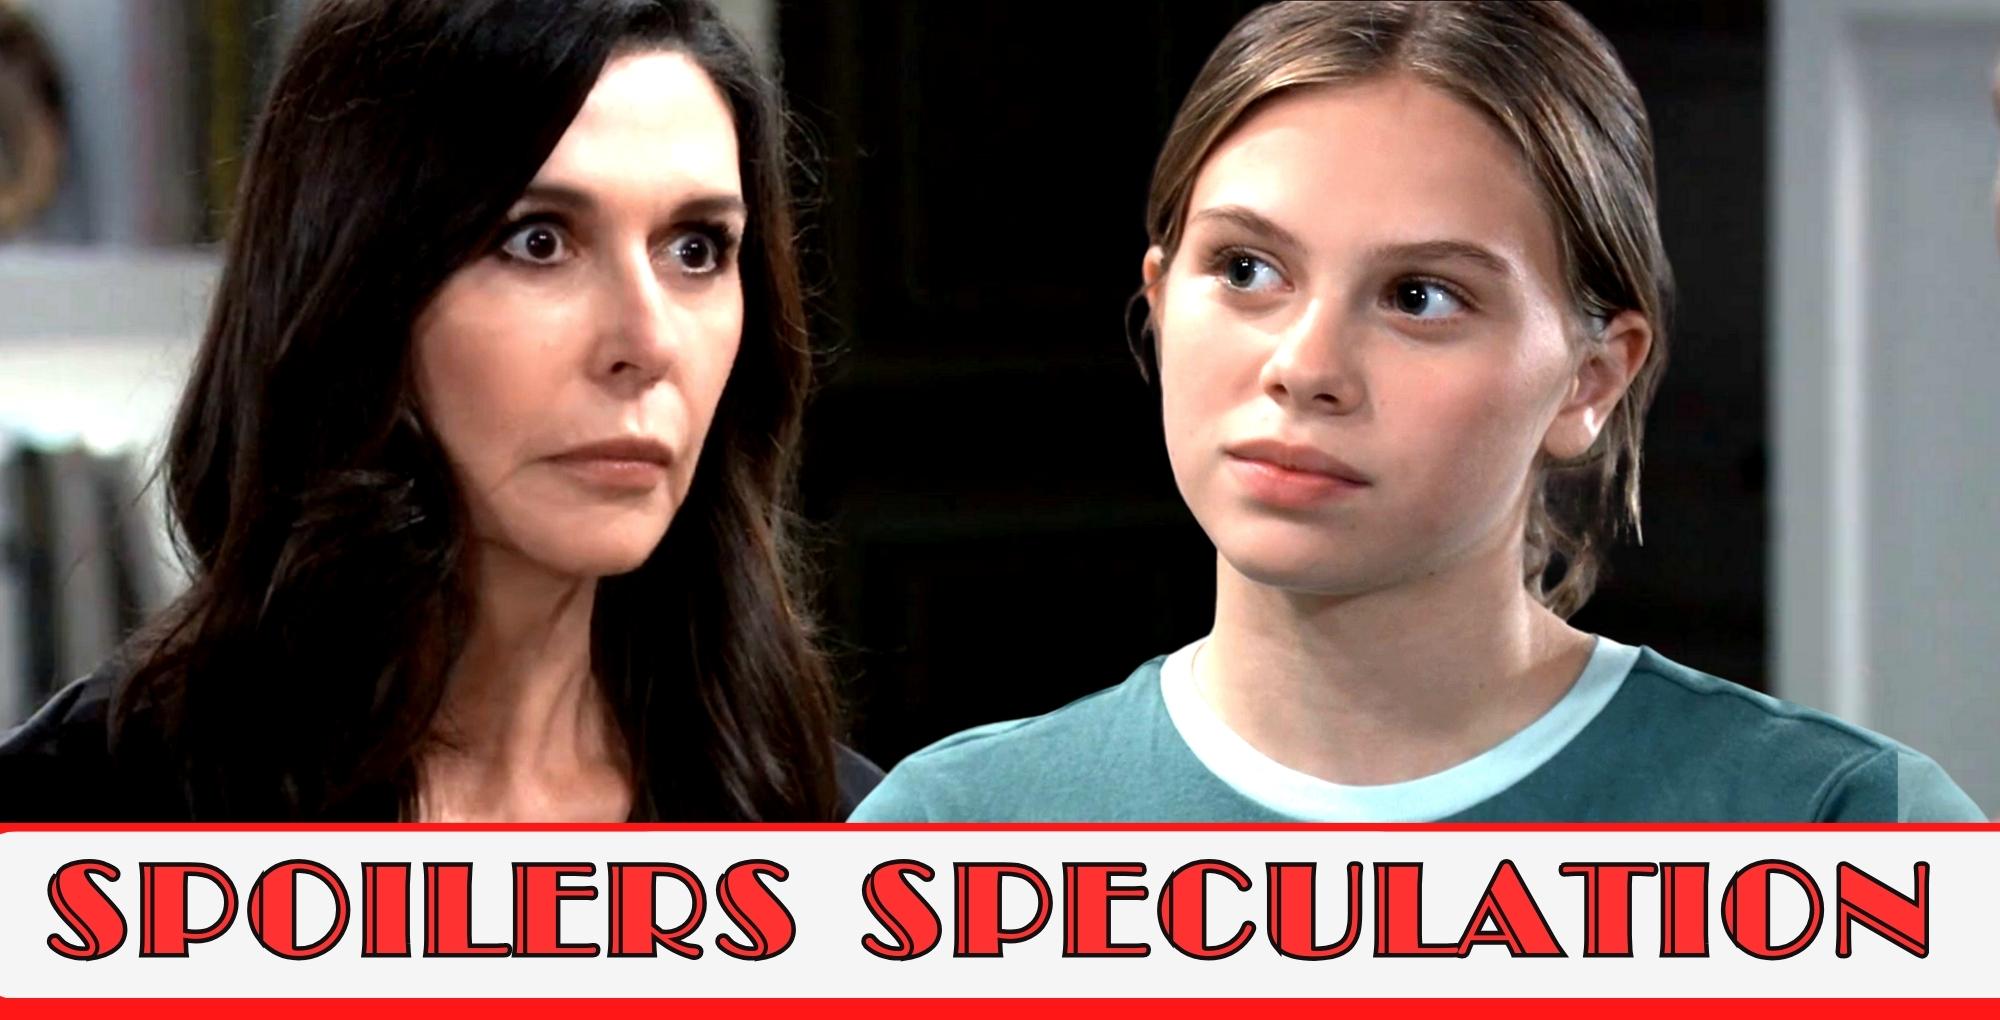 gh spoilers speculation banner over anna and charlotte.